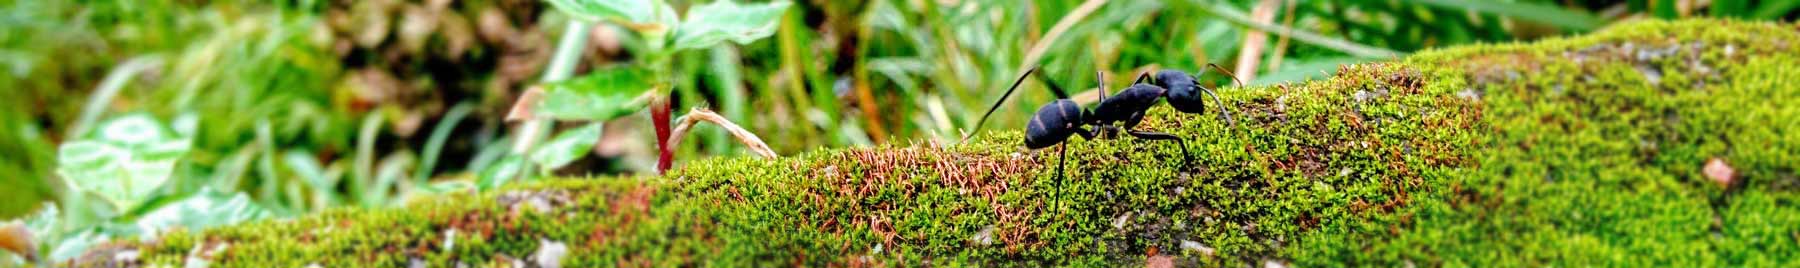 black perl ant on moss